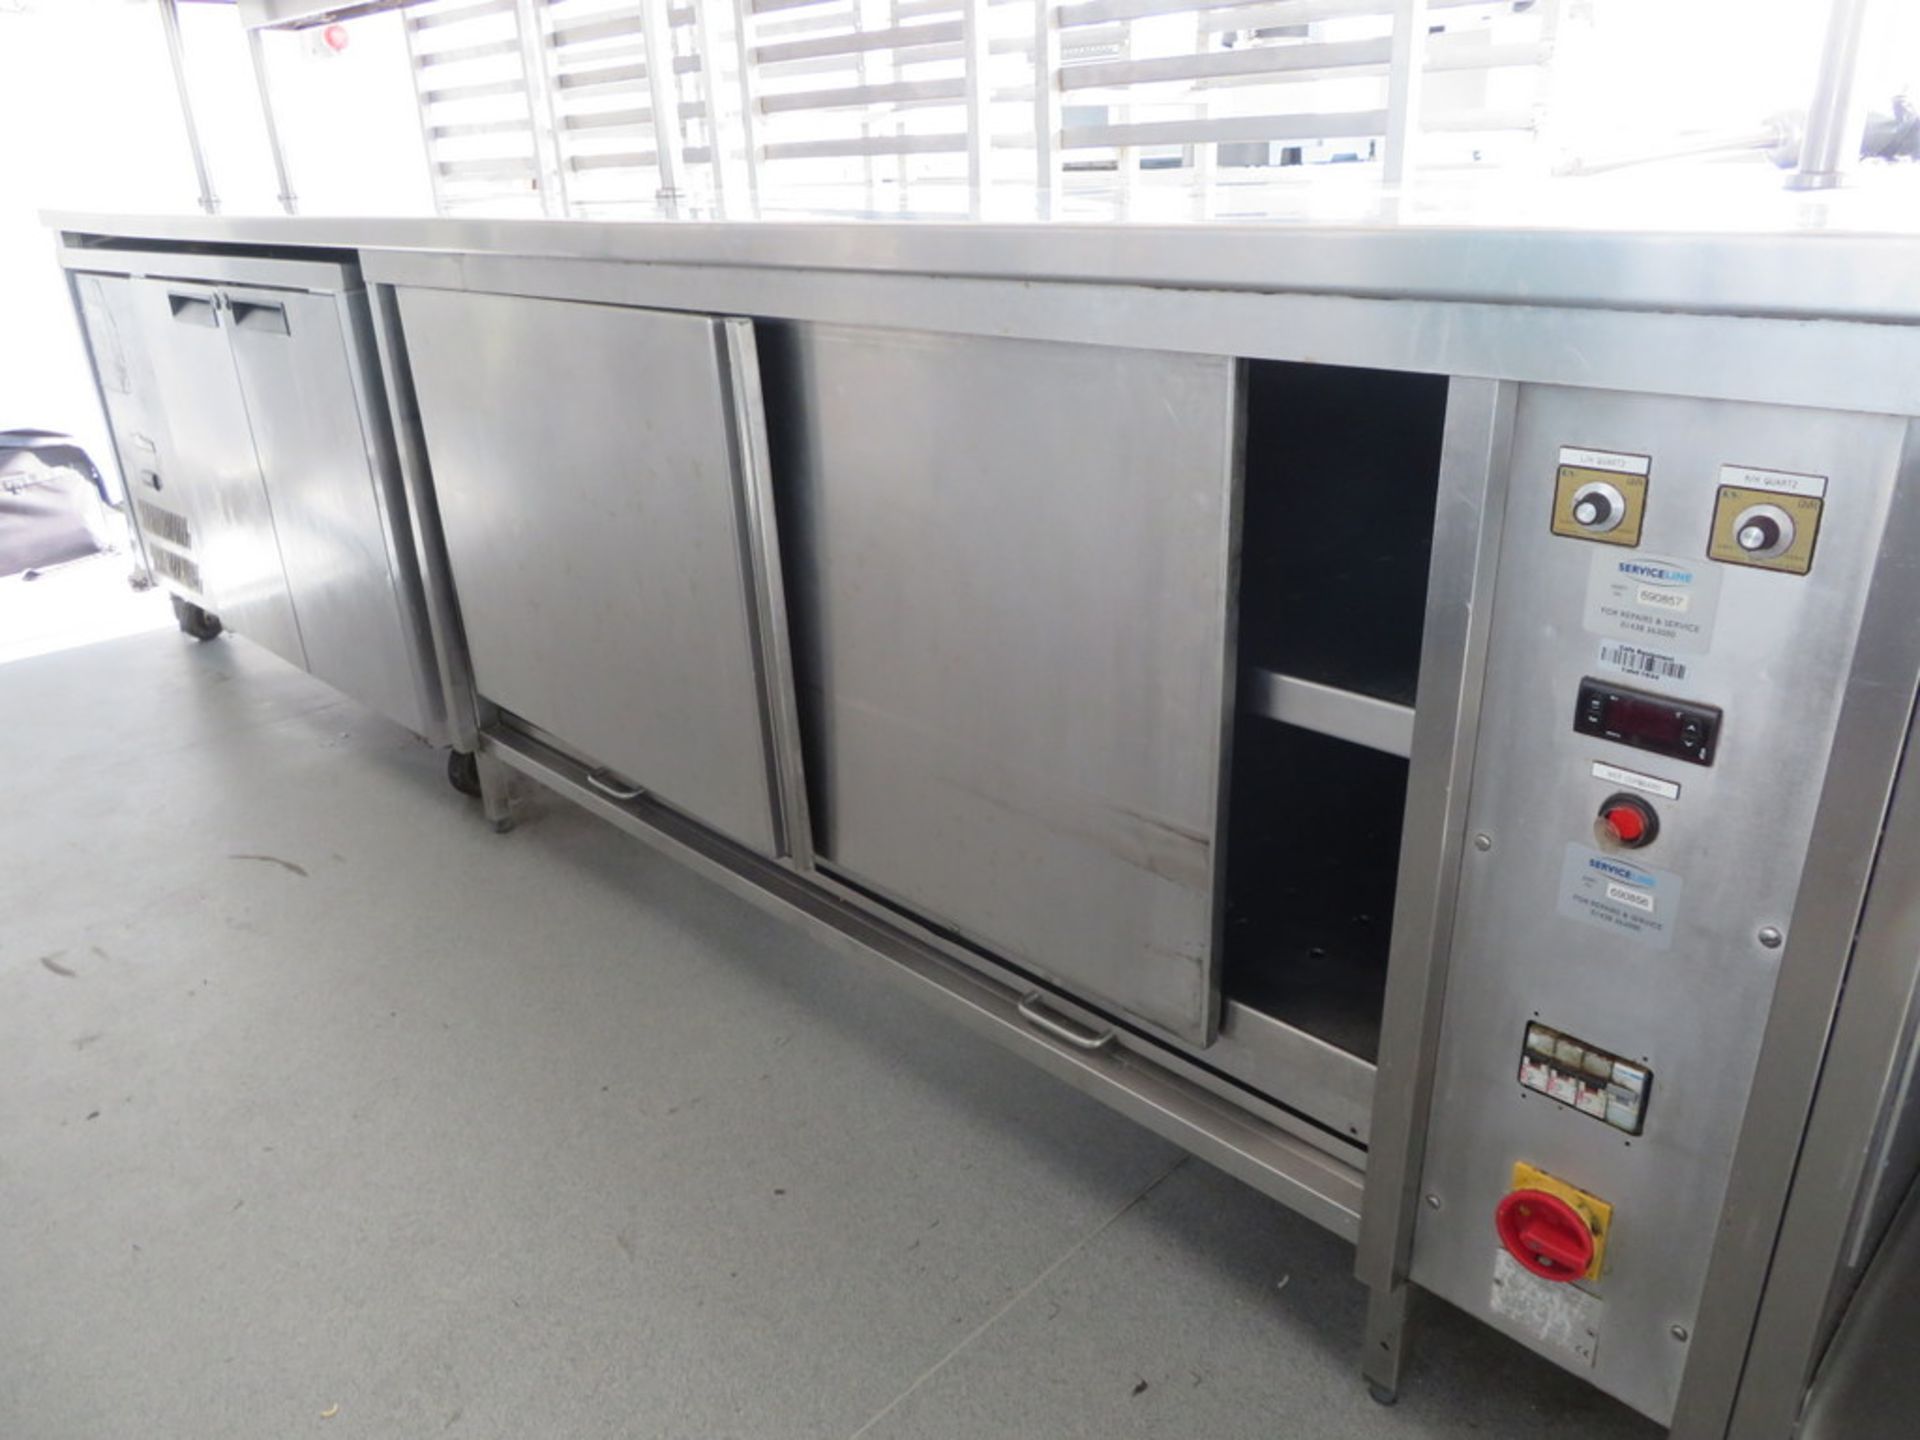 LARGE STAINLESS STEEL SERVING COUNTER AND HOT CUPBOARD WITH OVERSHELF/HOT LAMPS - Image 3 of 4